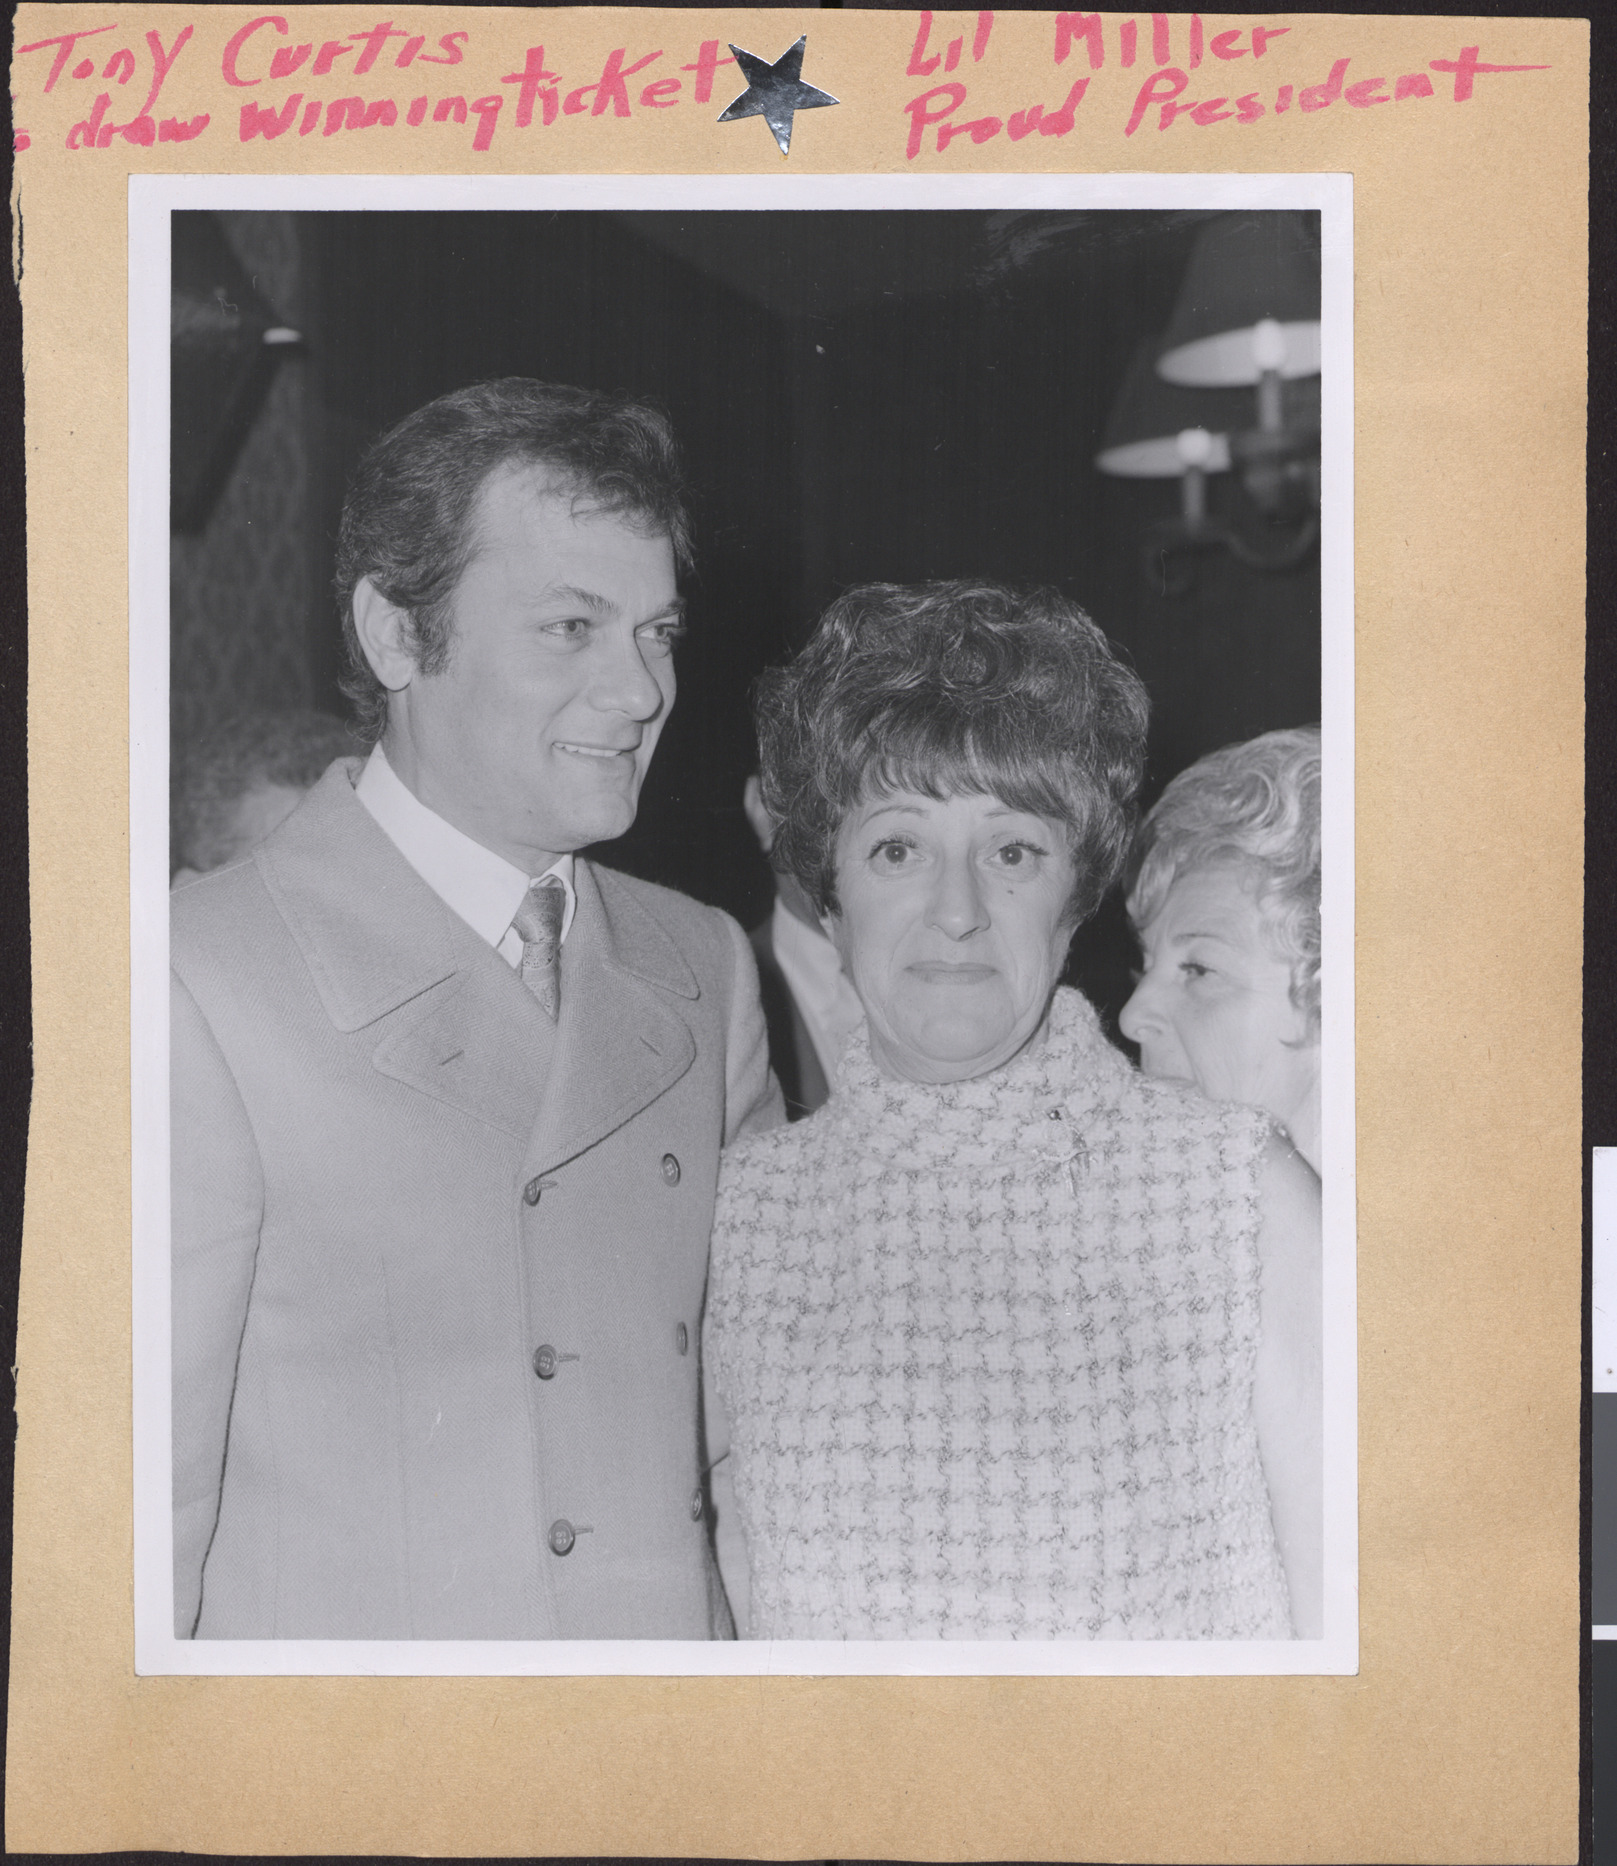 Cocktail Party, Bonanza Hotel: Photograph of Tony Curtis and Lillian Miller